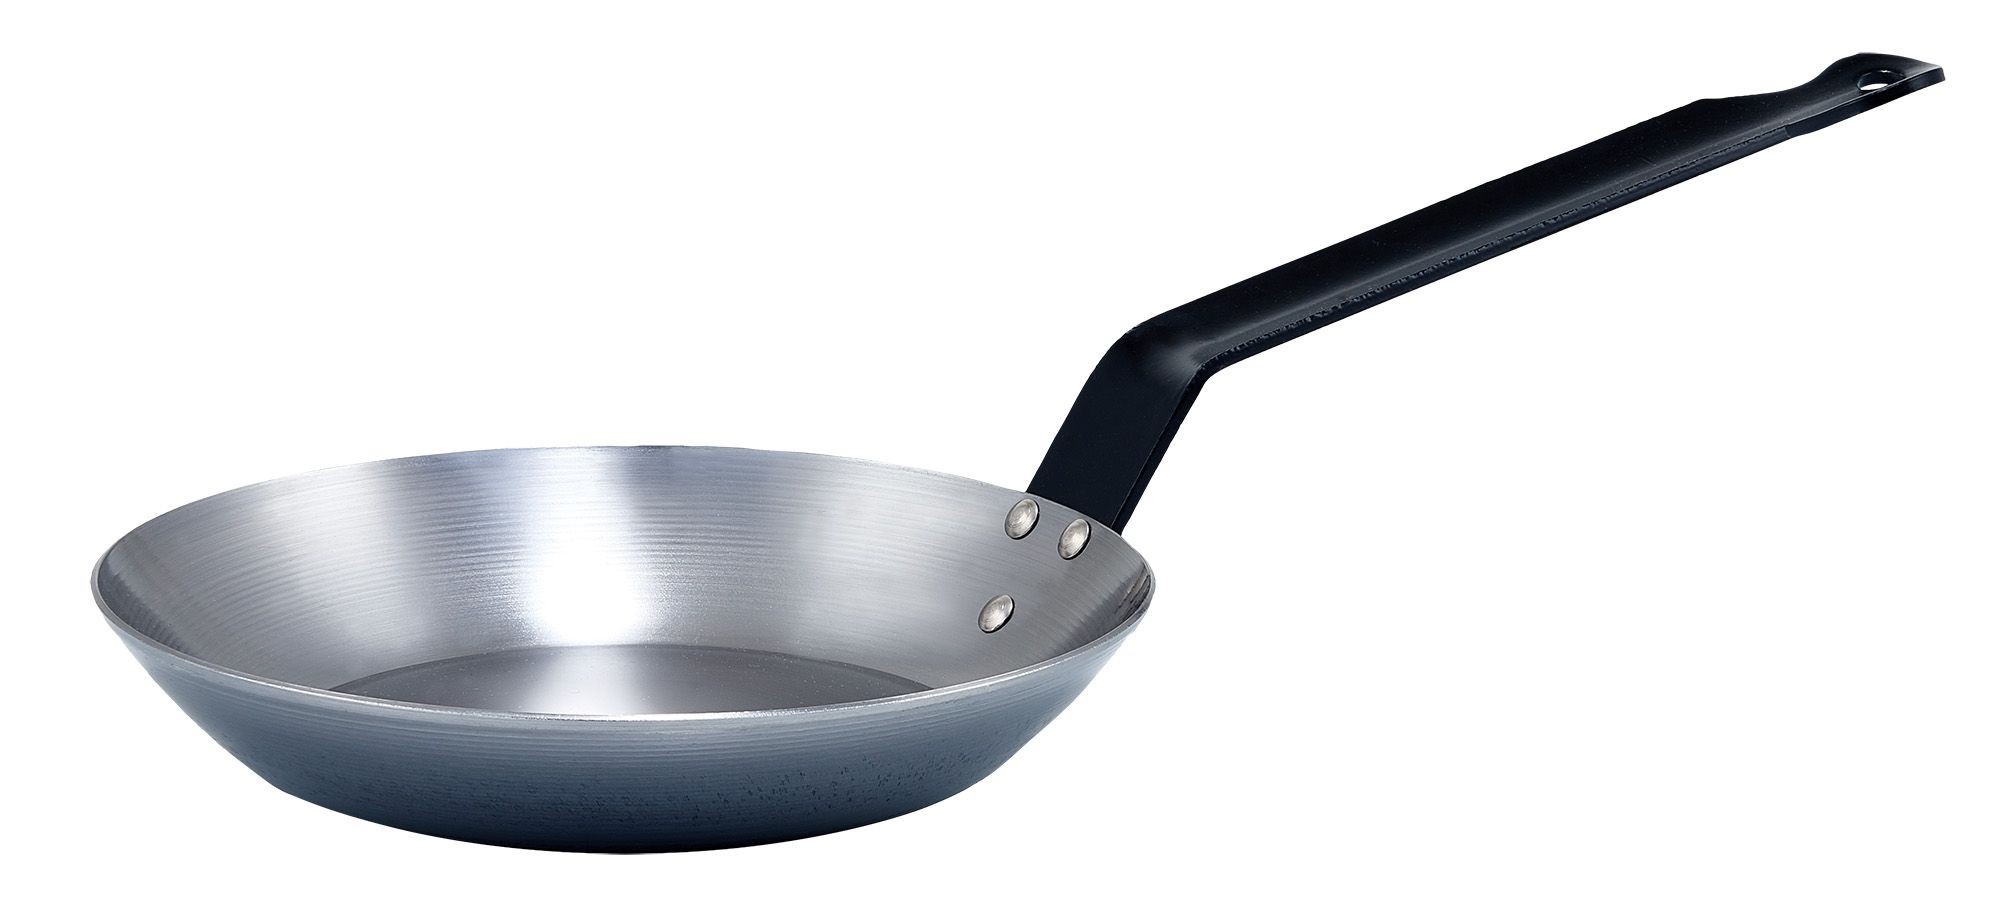 Winco CSFP-9 French Style Carbon Steel Fry Pan 9-1/2"